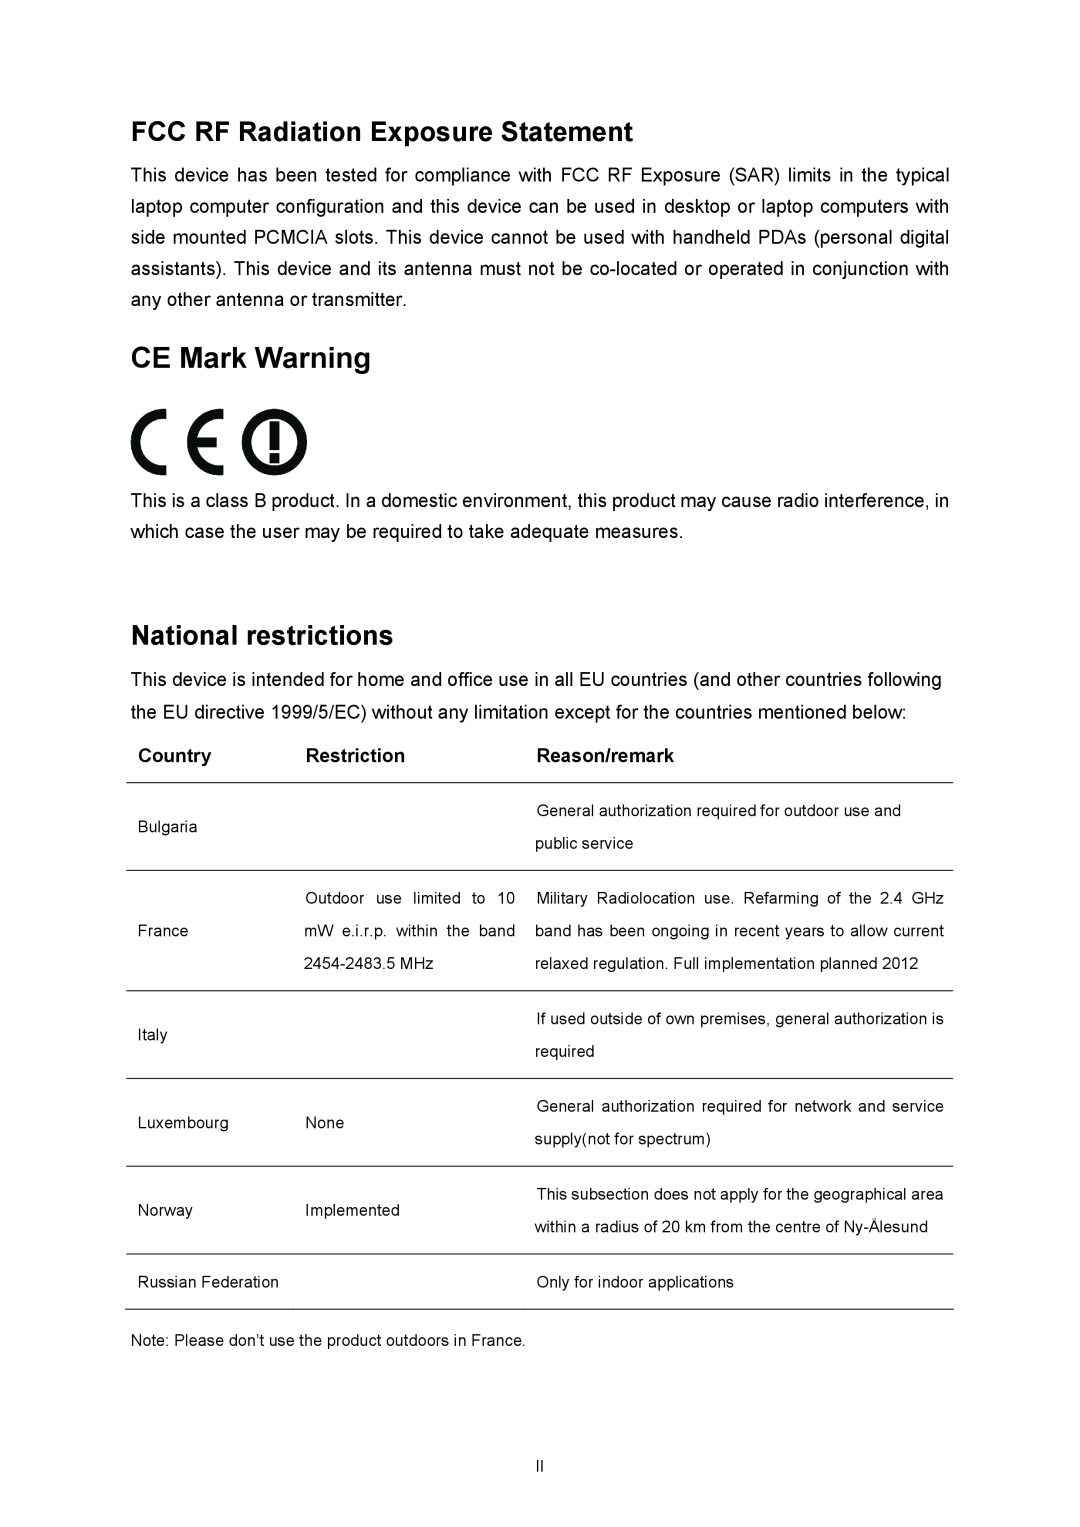 Vizio TL-WN727N manual CE Mark Warning, FCC RF Radiation Exposure Statement, National restrictions, Country, Restriction 